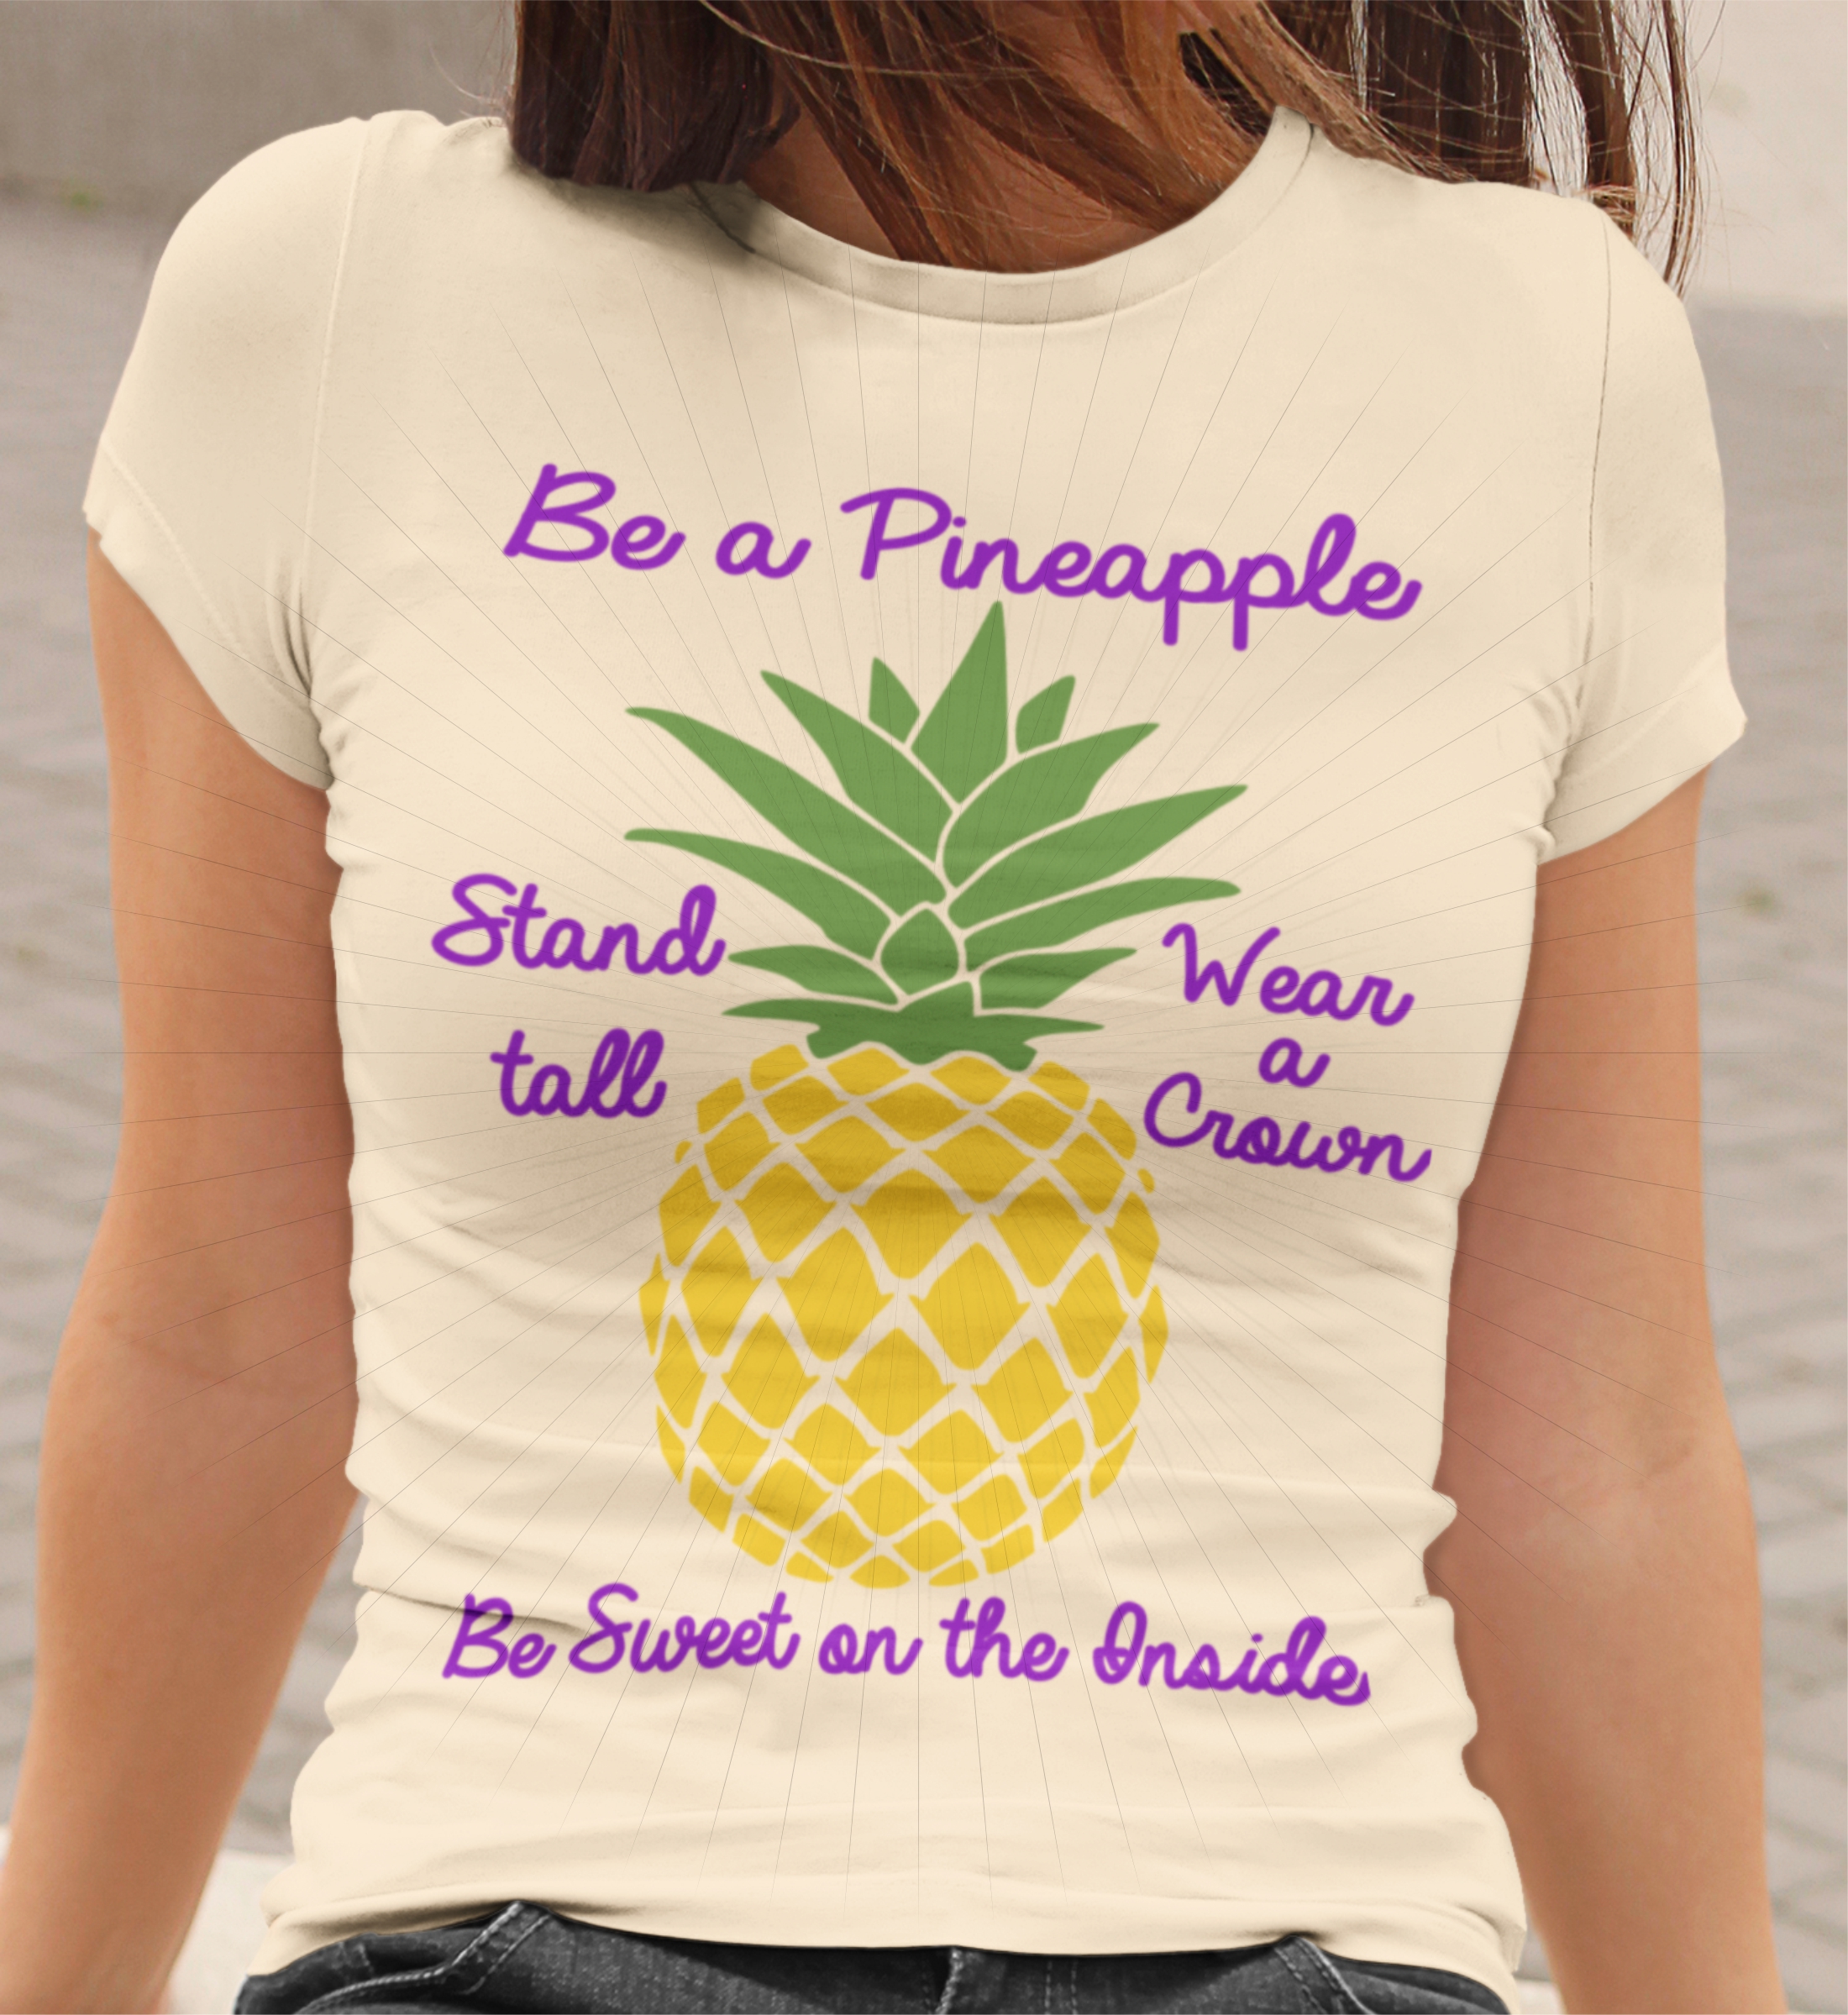 Download Be A Pineapple SVG Cut Print Clipart digital download for ...